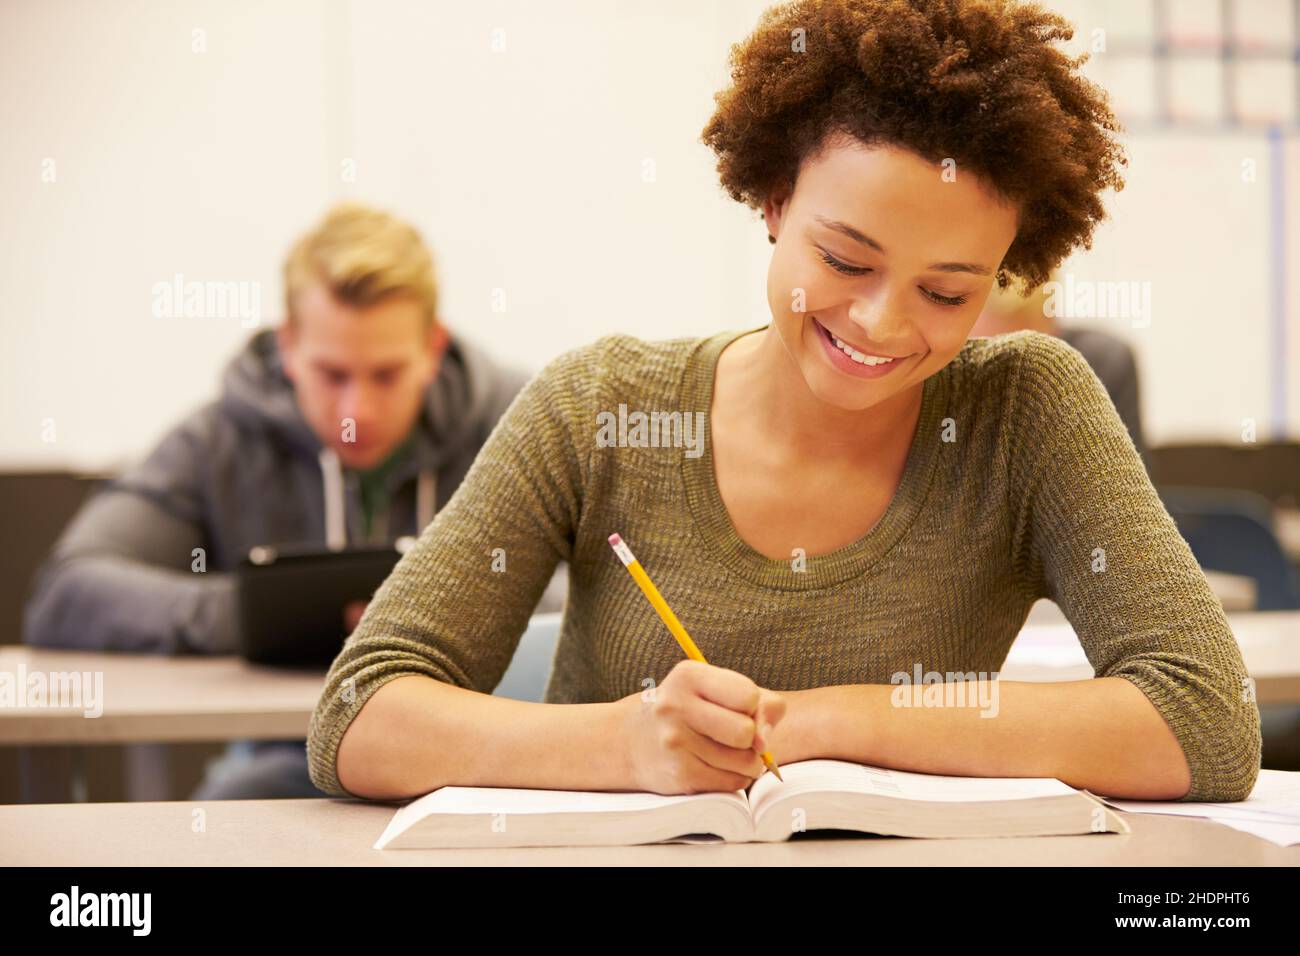 education, learning, class, student, educations, students Stock Photo